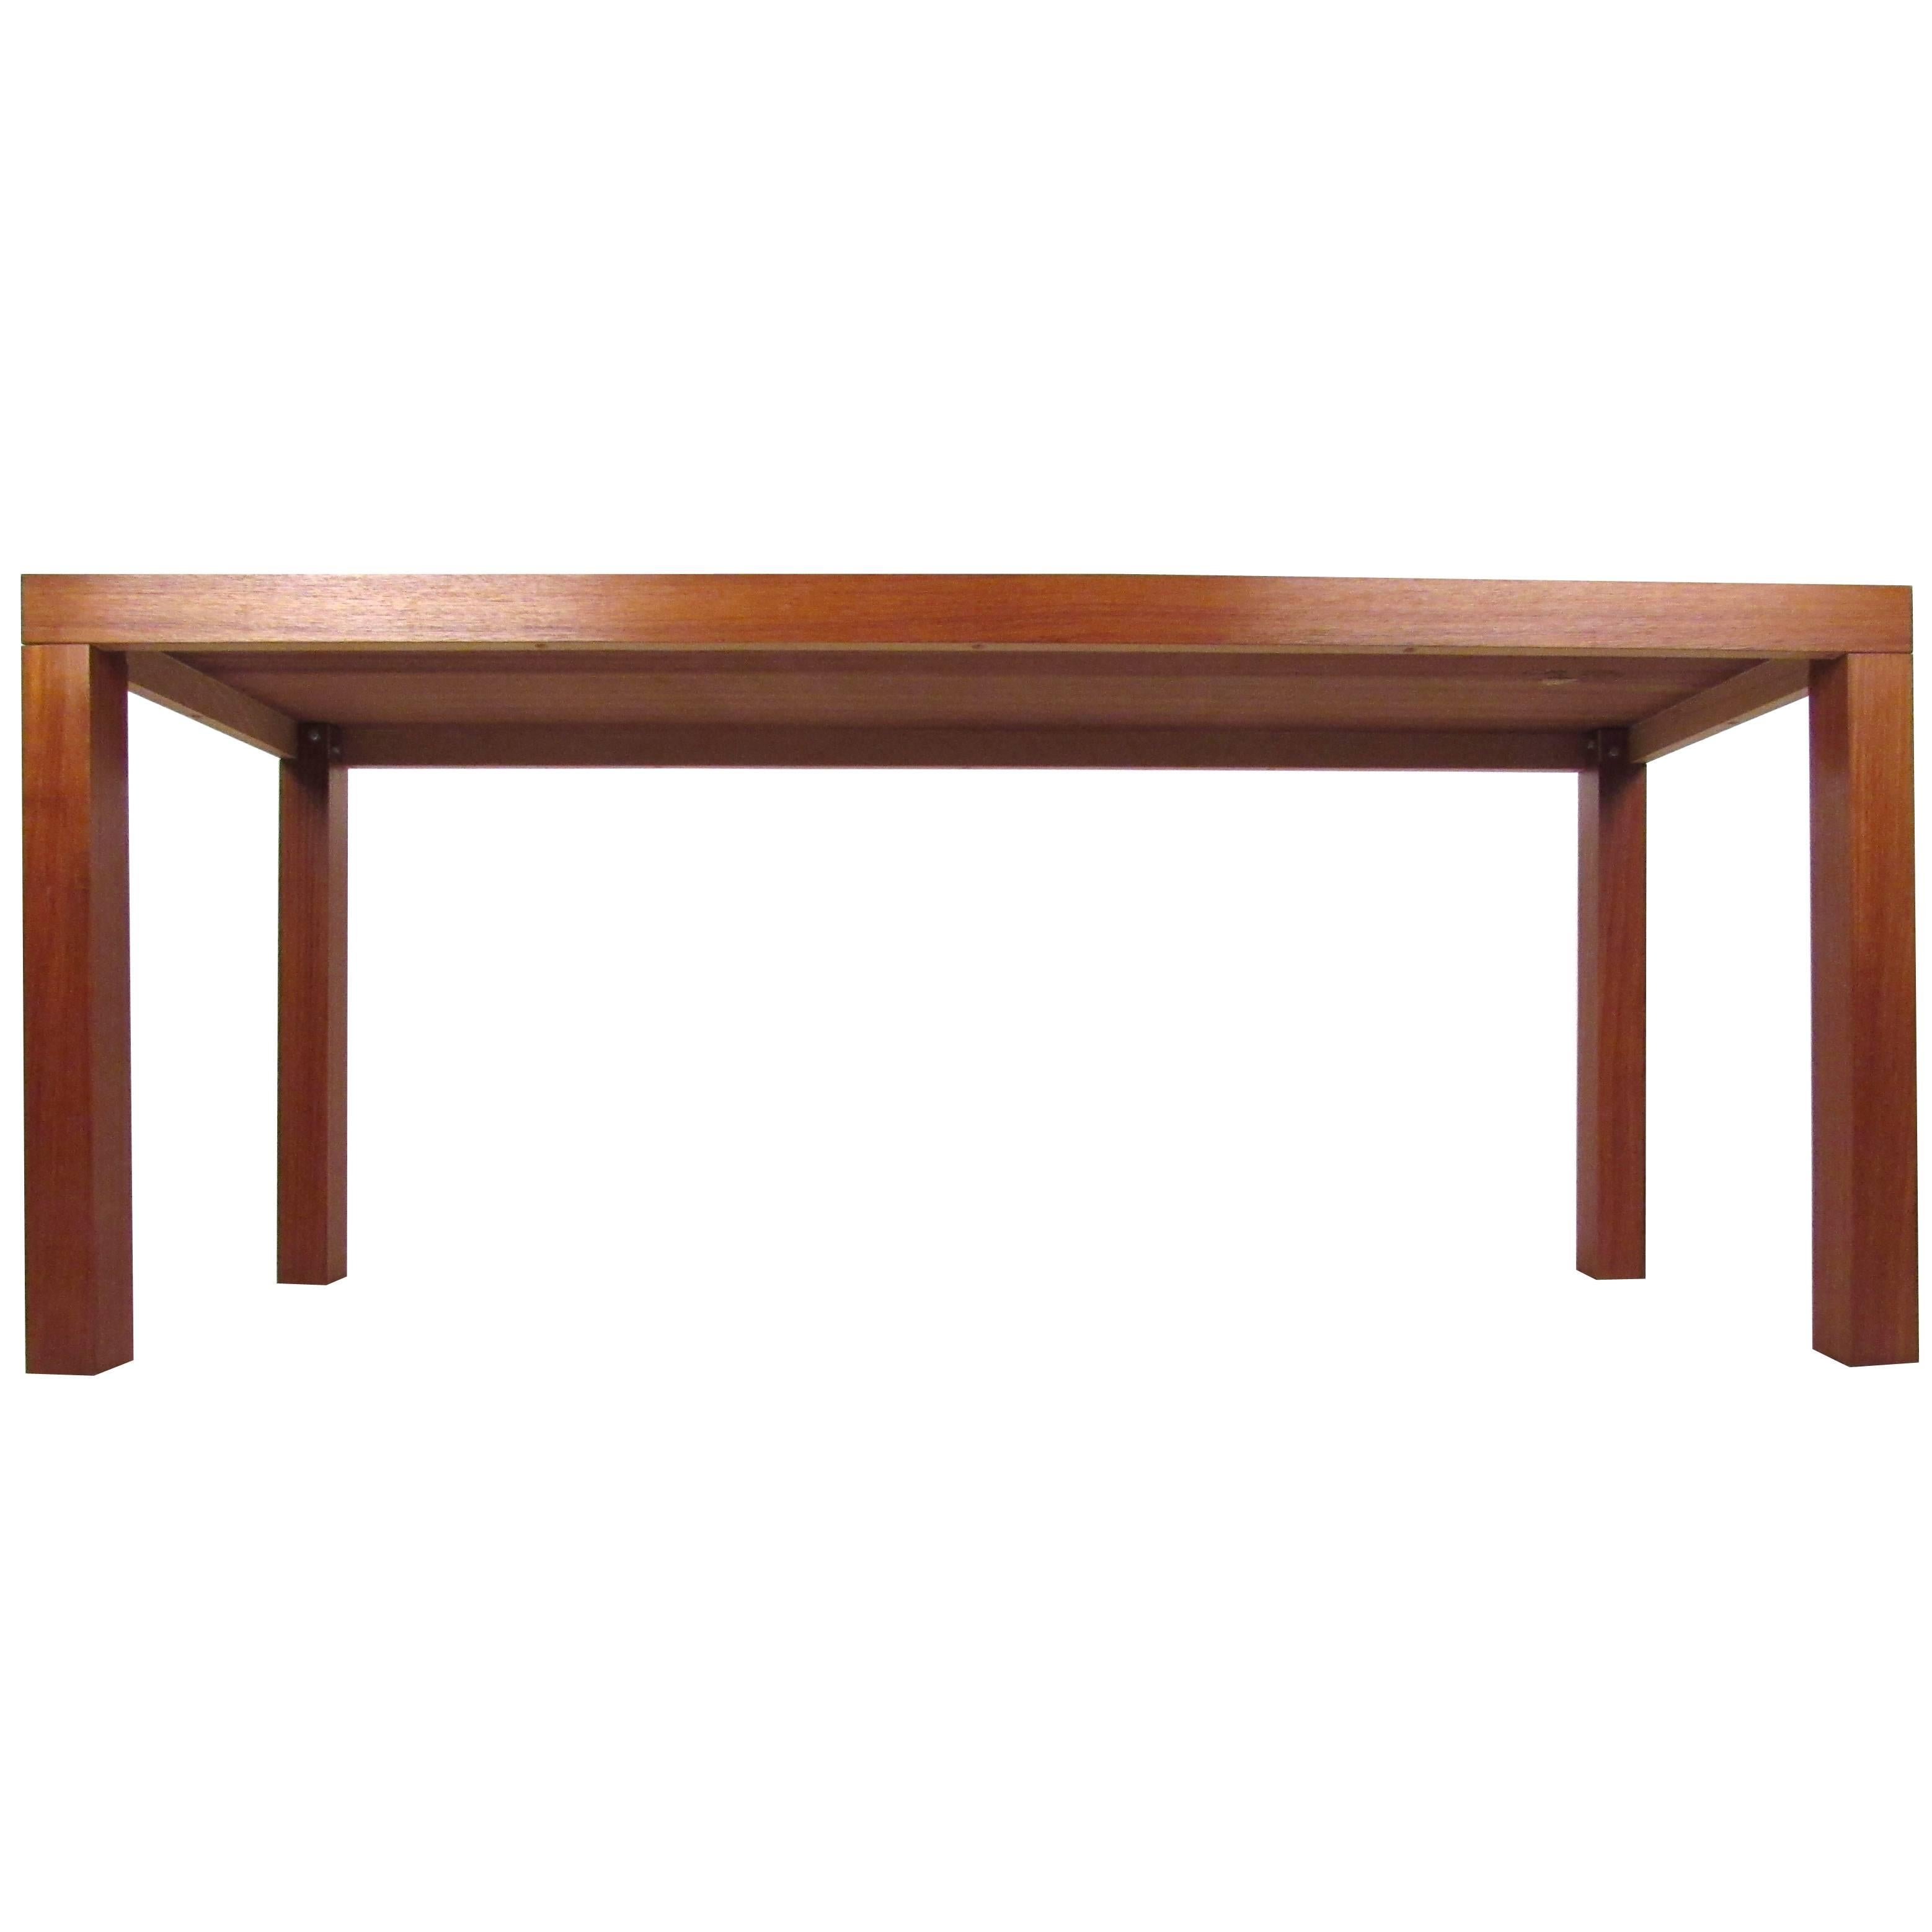 This unique hall table features a rich natural finish and makes a lovely vintage addition to any foyer or entryway. Simplistic lines and wide table top make this ideal for display. Please confirm item location (NY or NJ).
         
    